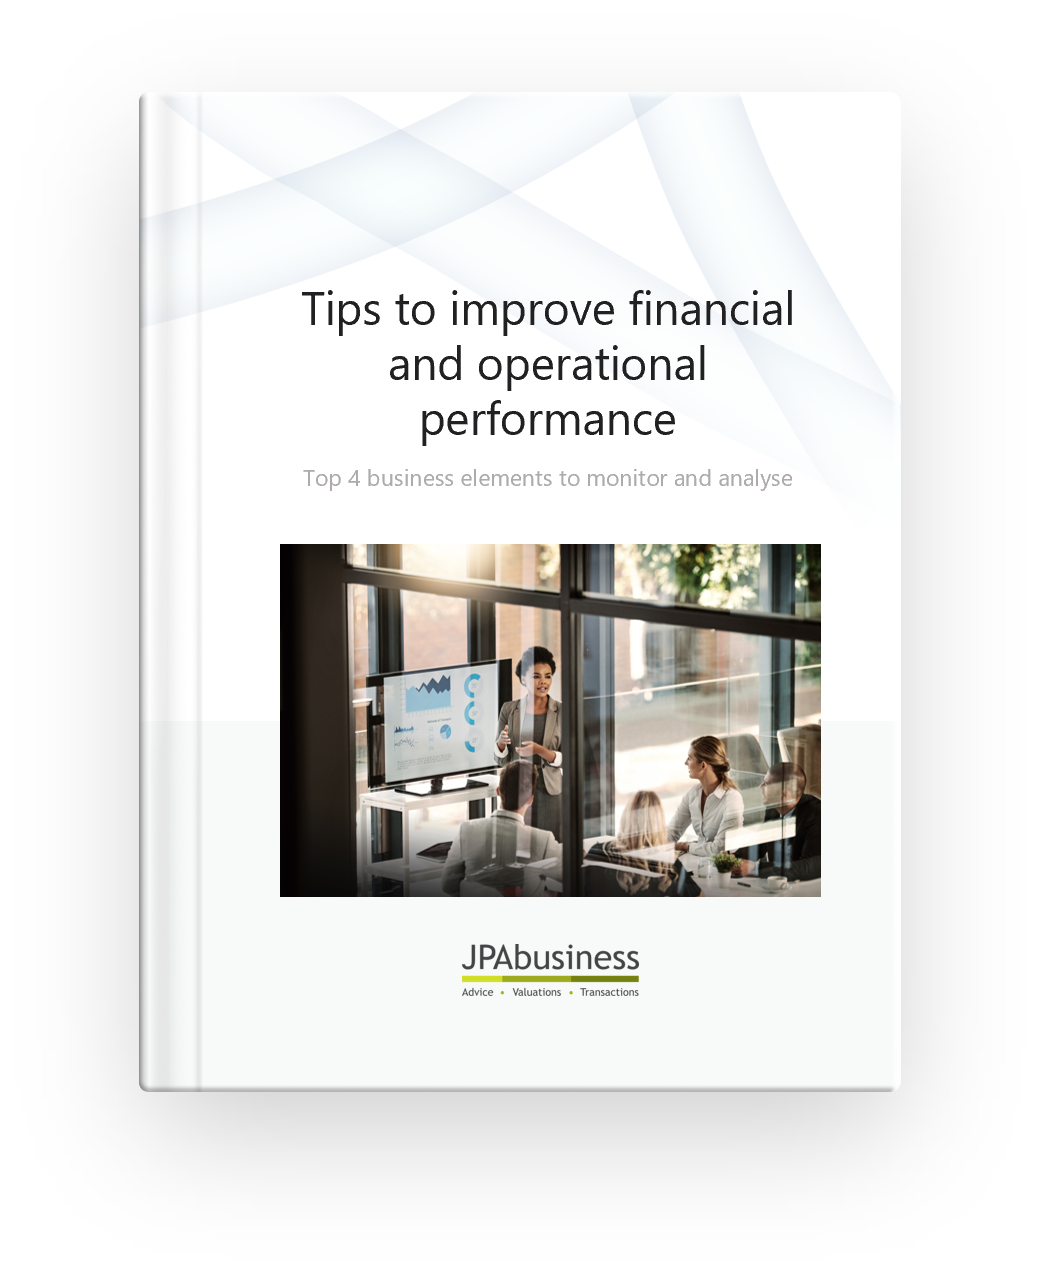 tips-to-improve-financial-and-operational-performance